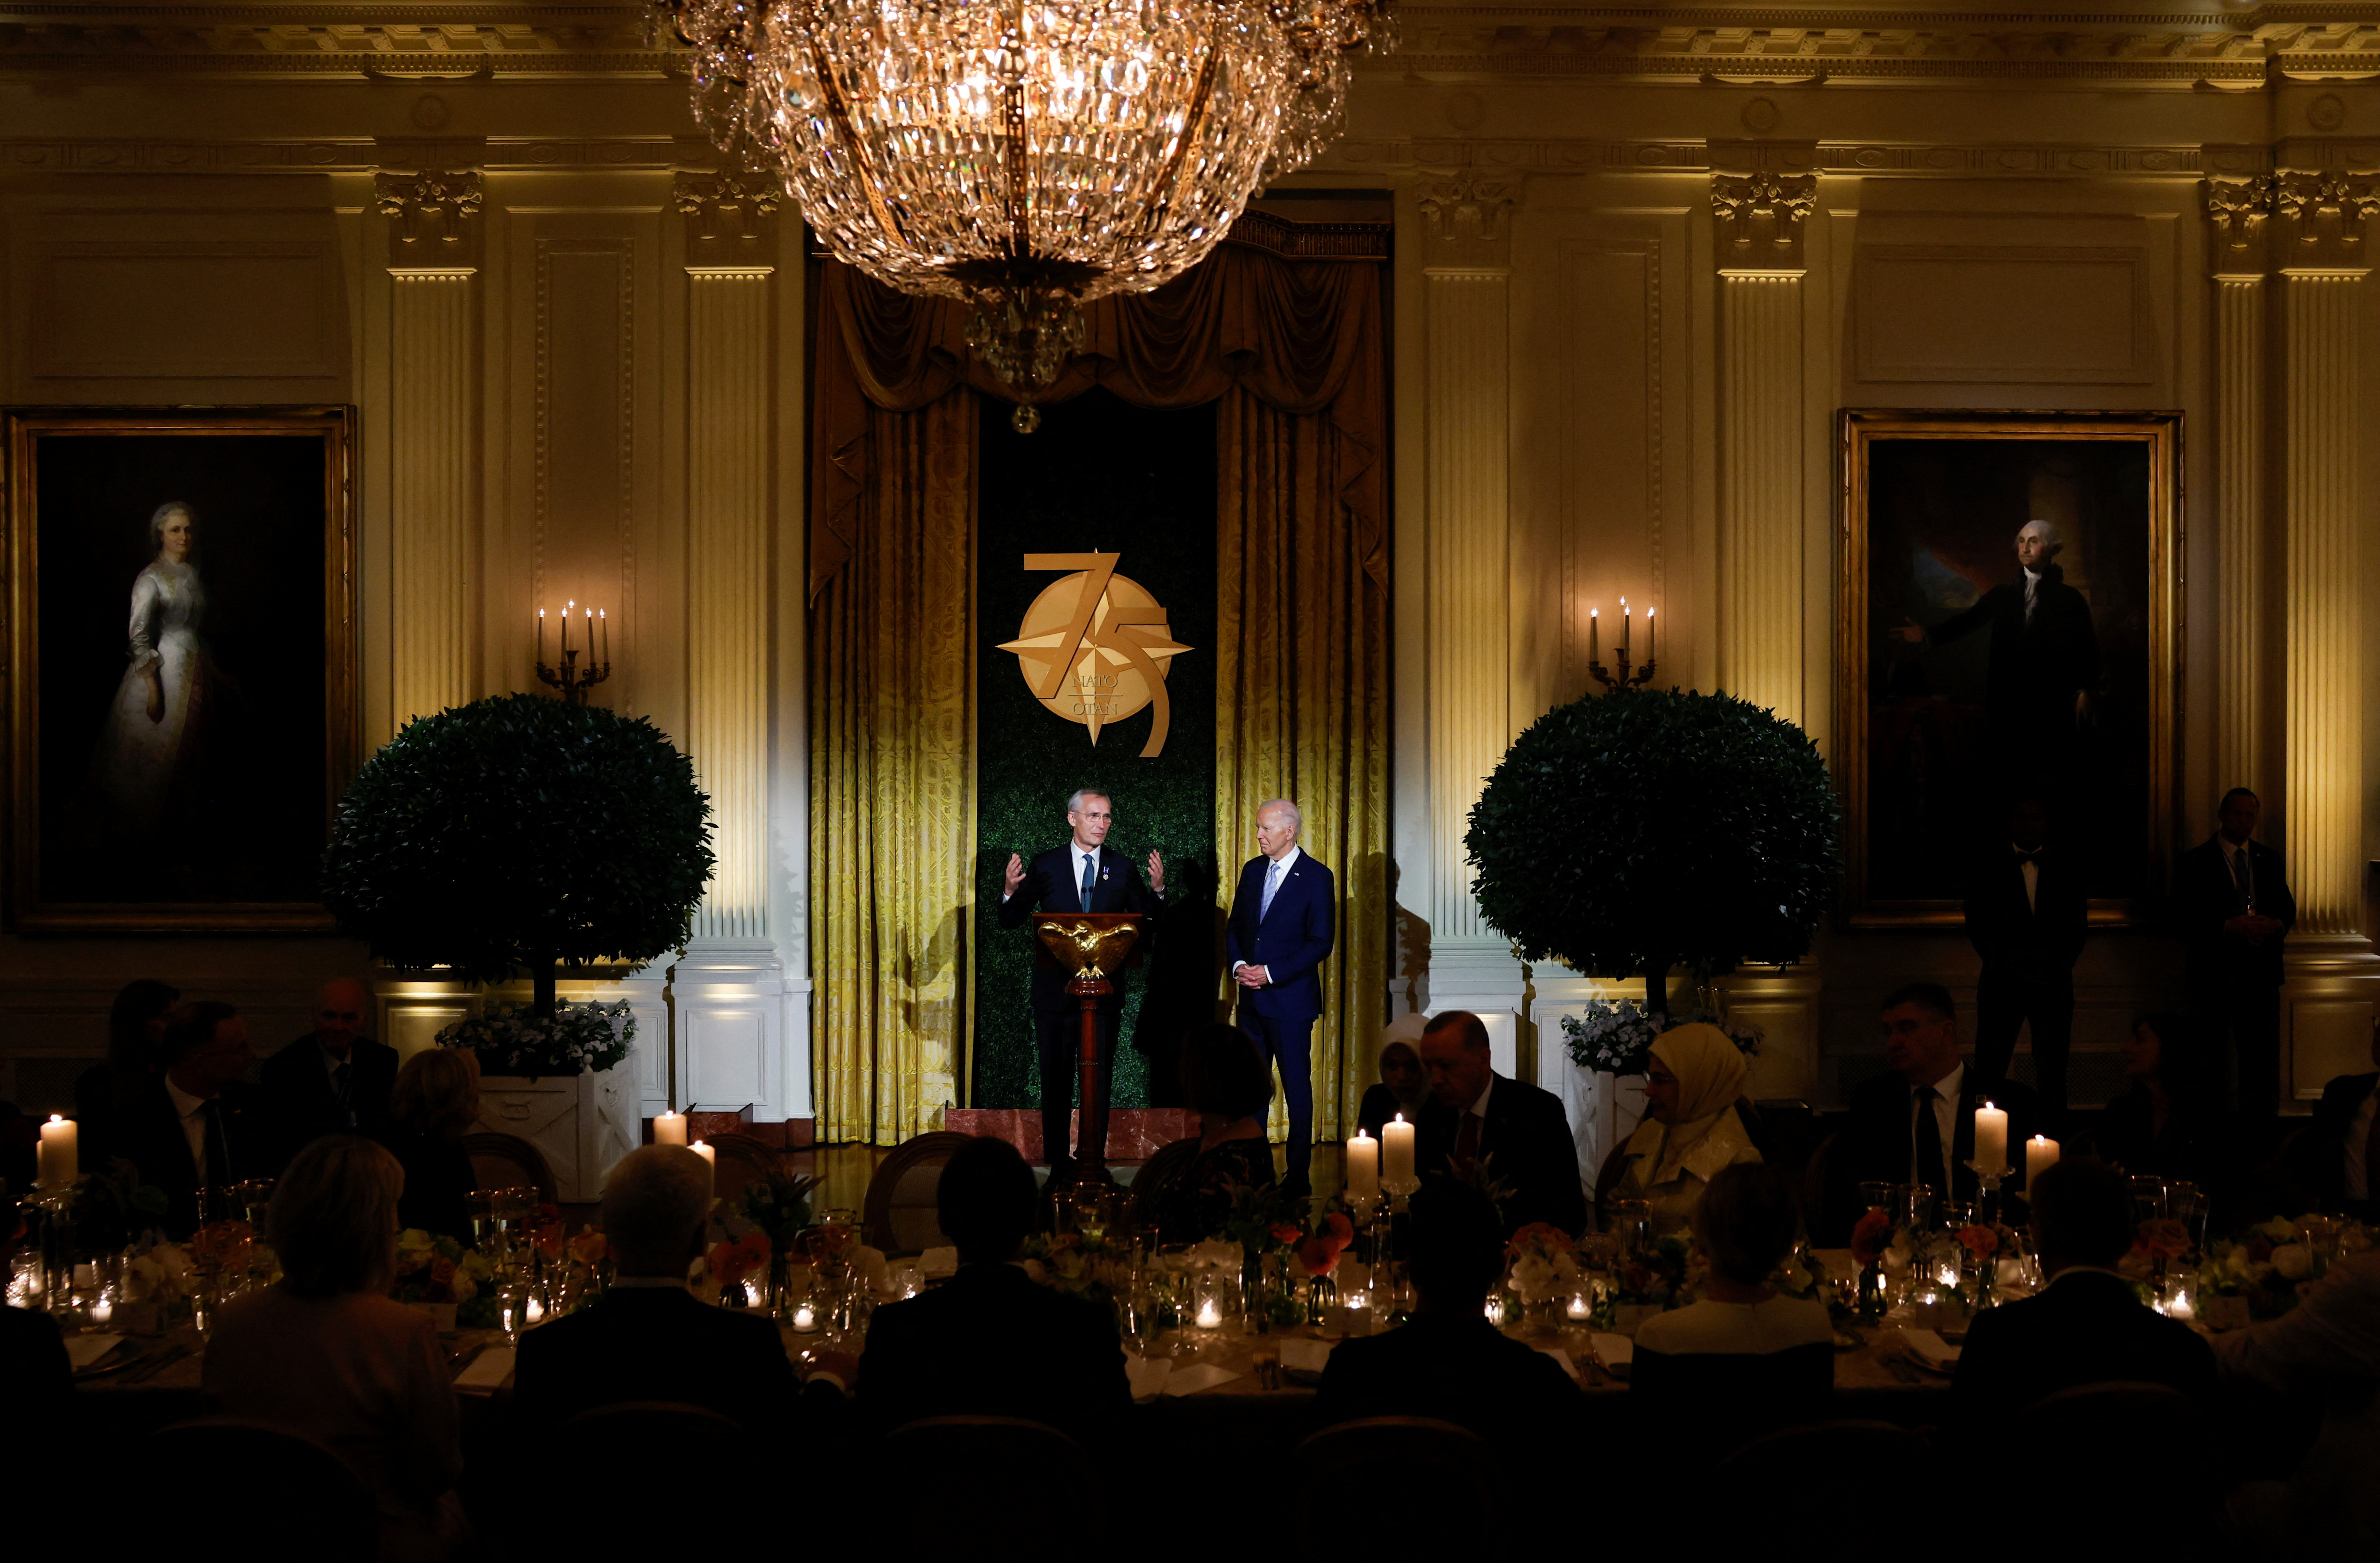 Dinner for NATO allies and partners during the NATO summit, in Washington